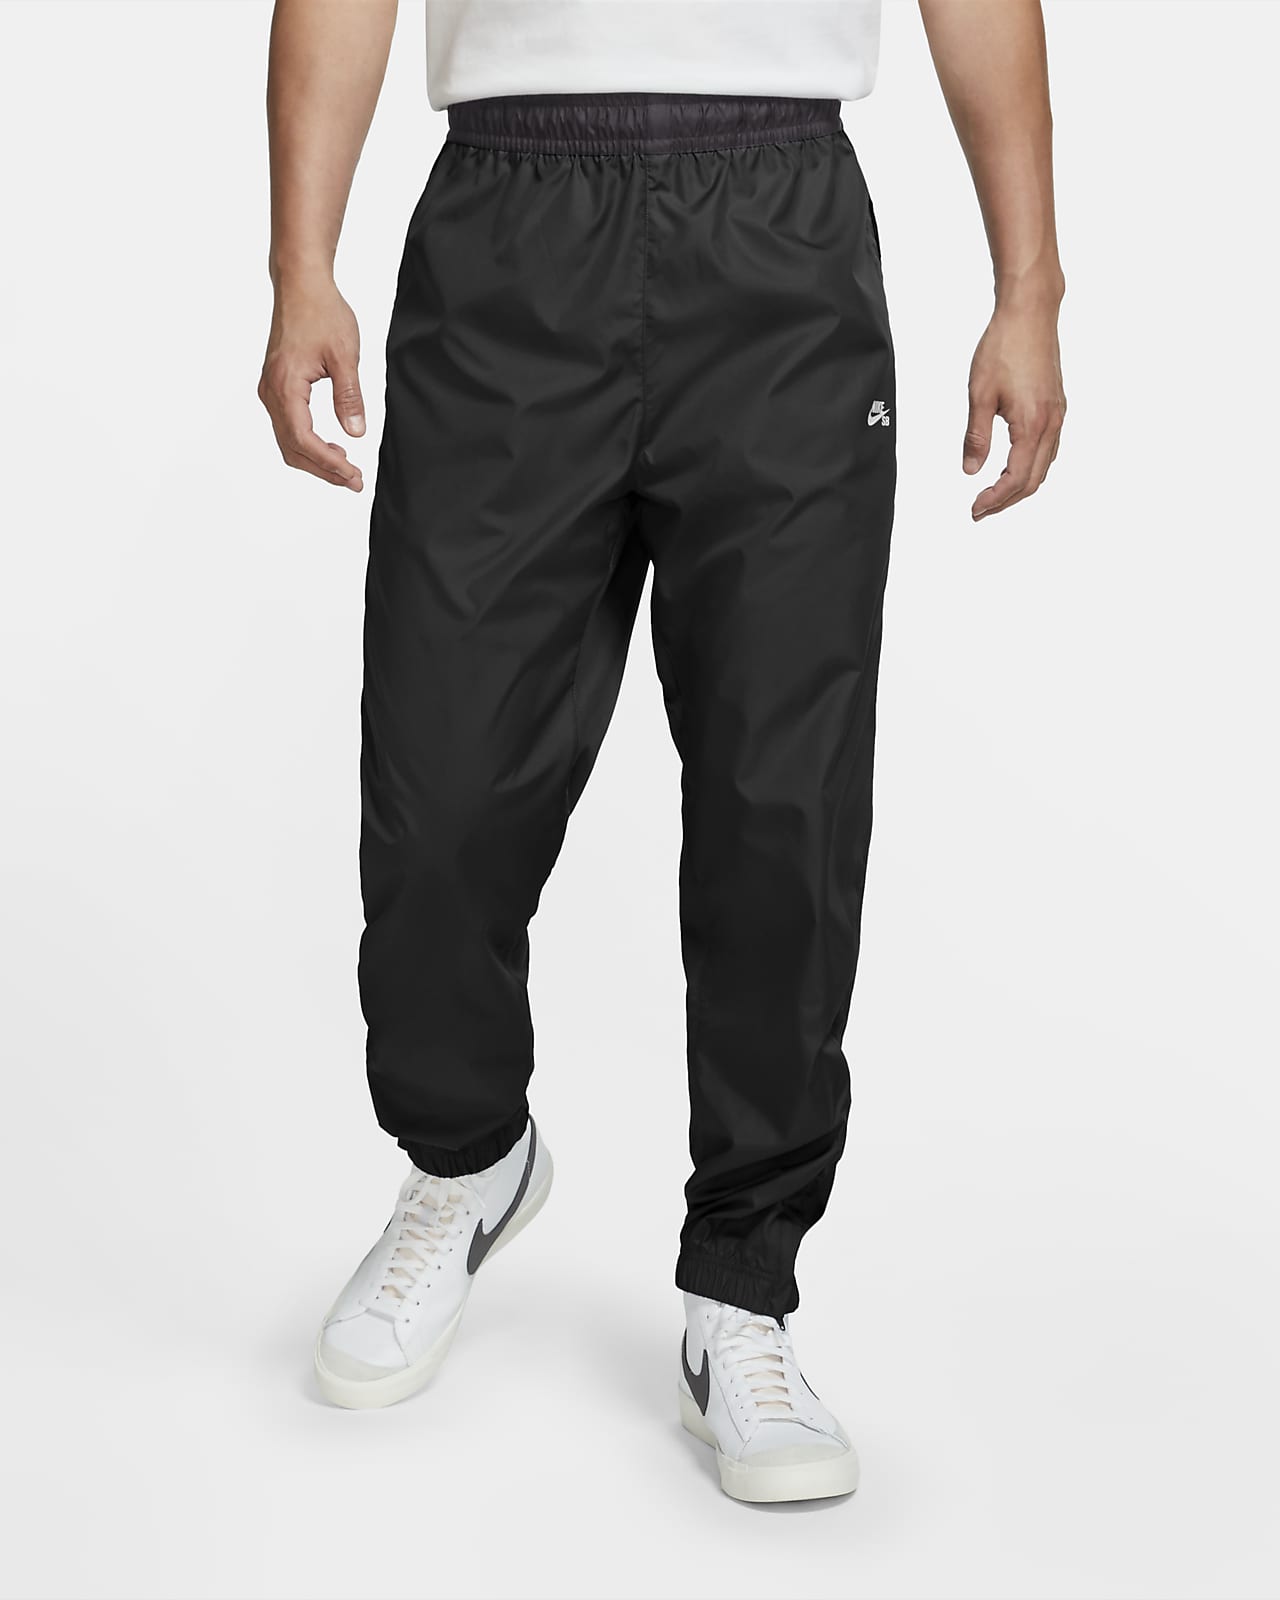 15 Minute Nike Skeleton Workout Pants with Comfort Workout Clothes